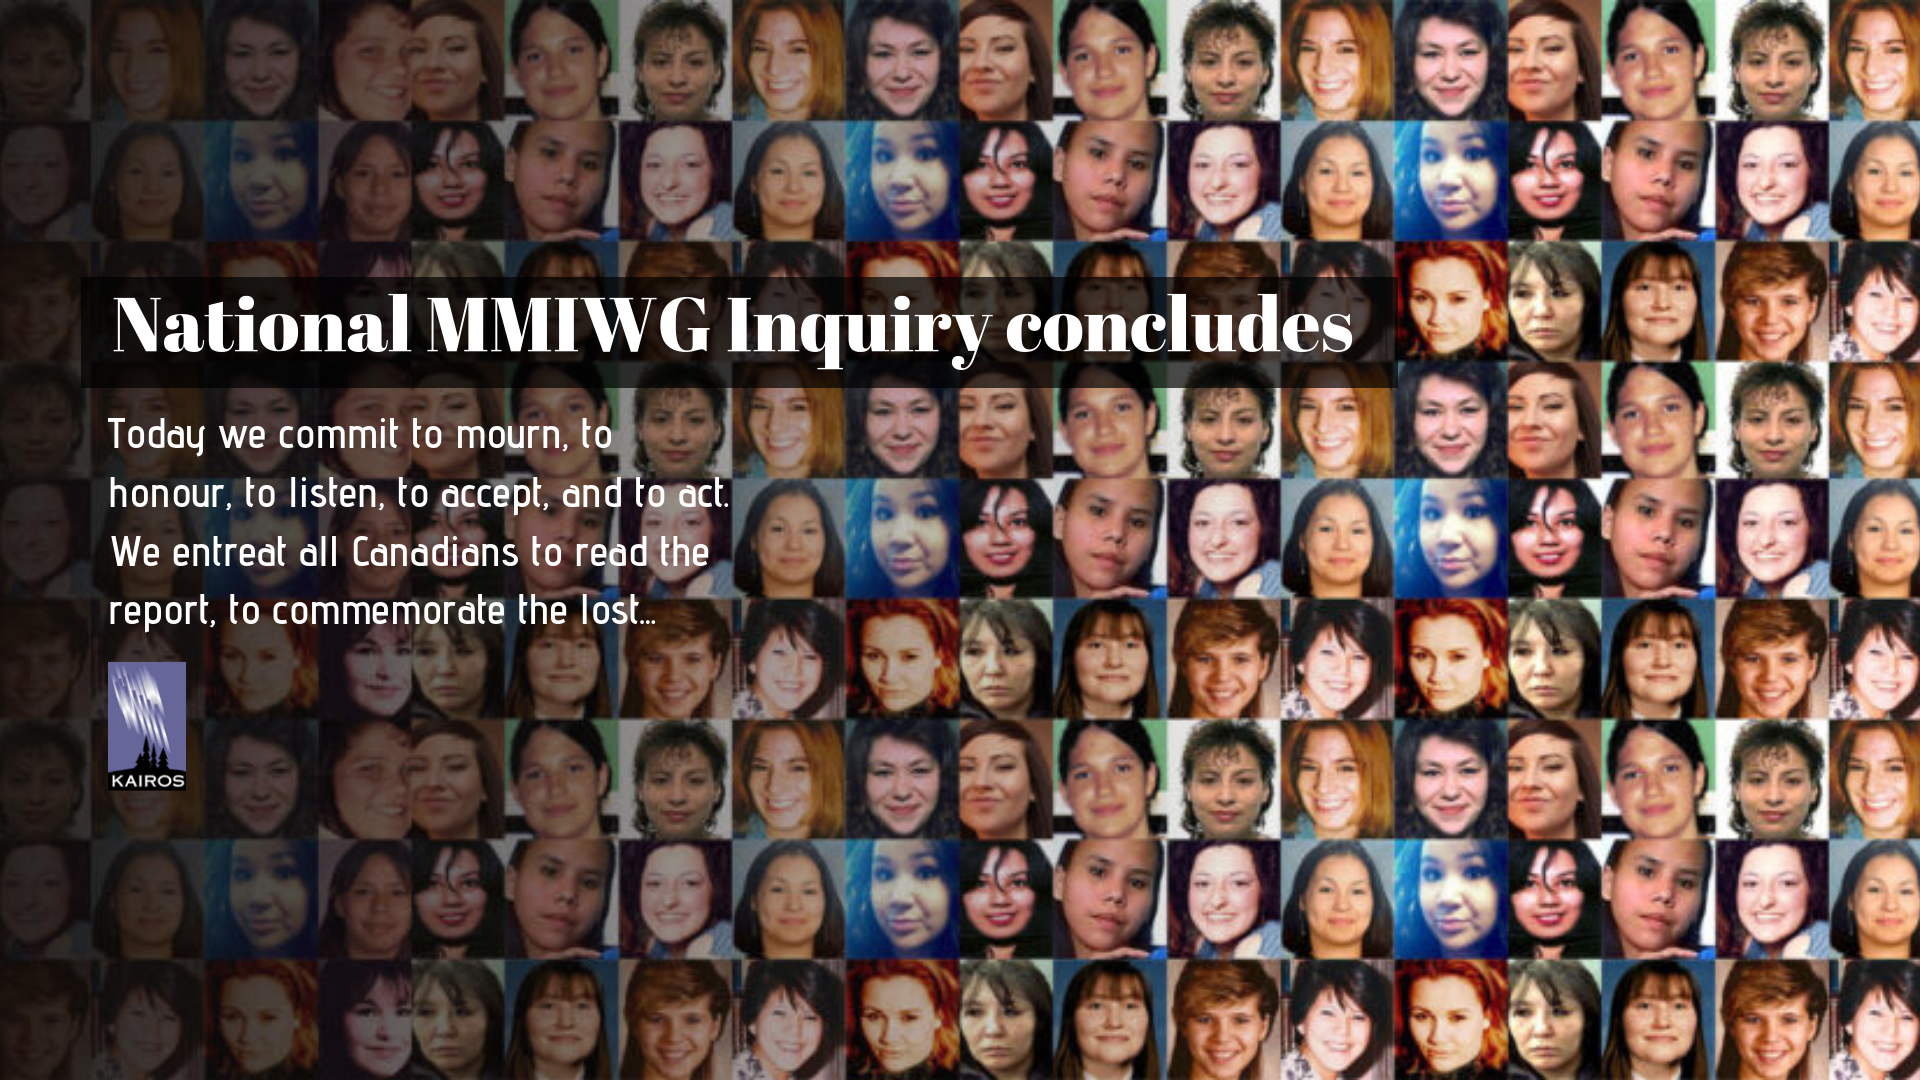 National MMIWG Inquiry Concludes. Today we commit to mourn, to listen, to accept, and to act. We entreat all Canadians to read the report, to commemorate the lost... 'collage of missing and murdered women and girls'